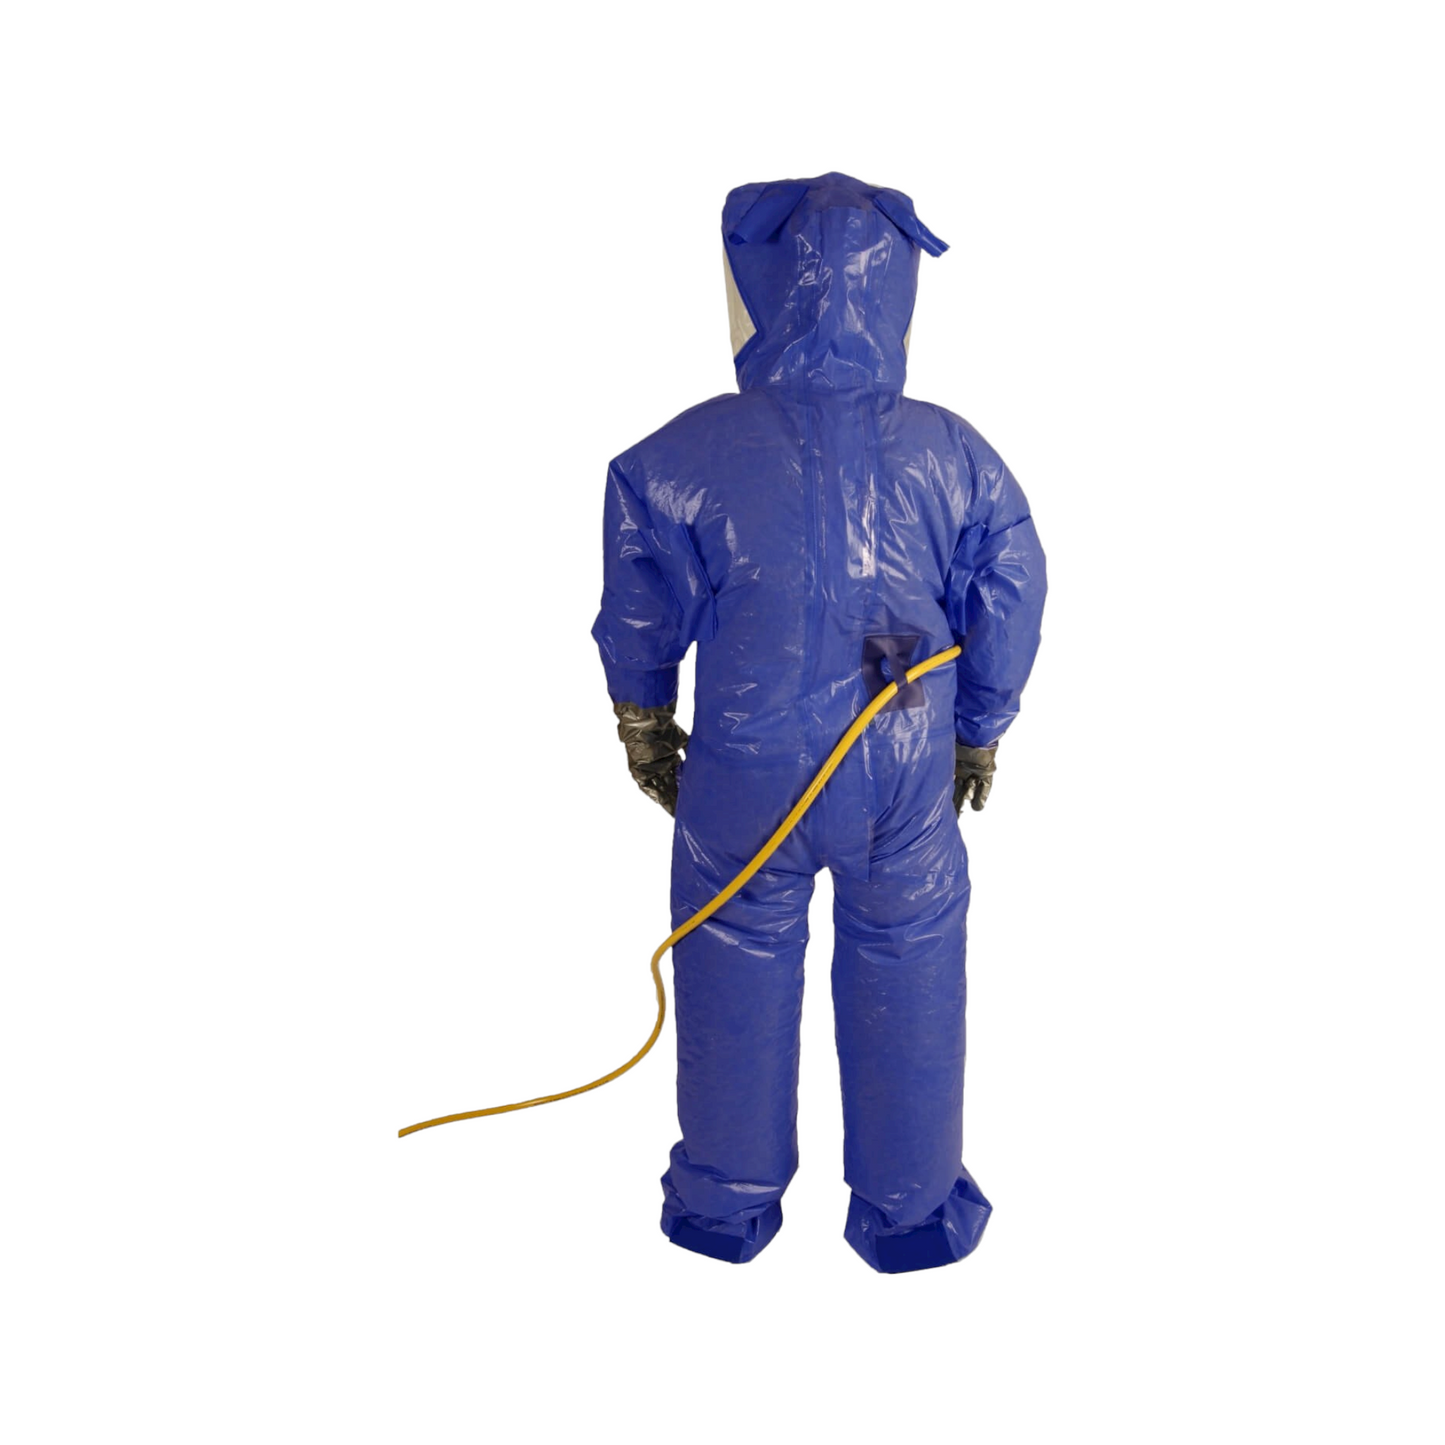 FRONTAIR 2 suit in Chemprotex 300